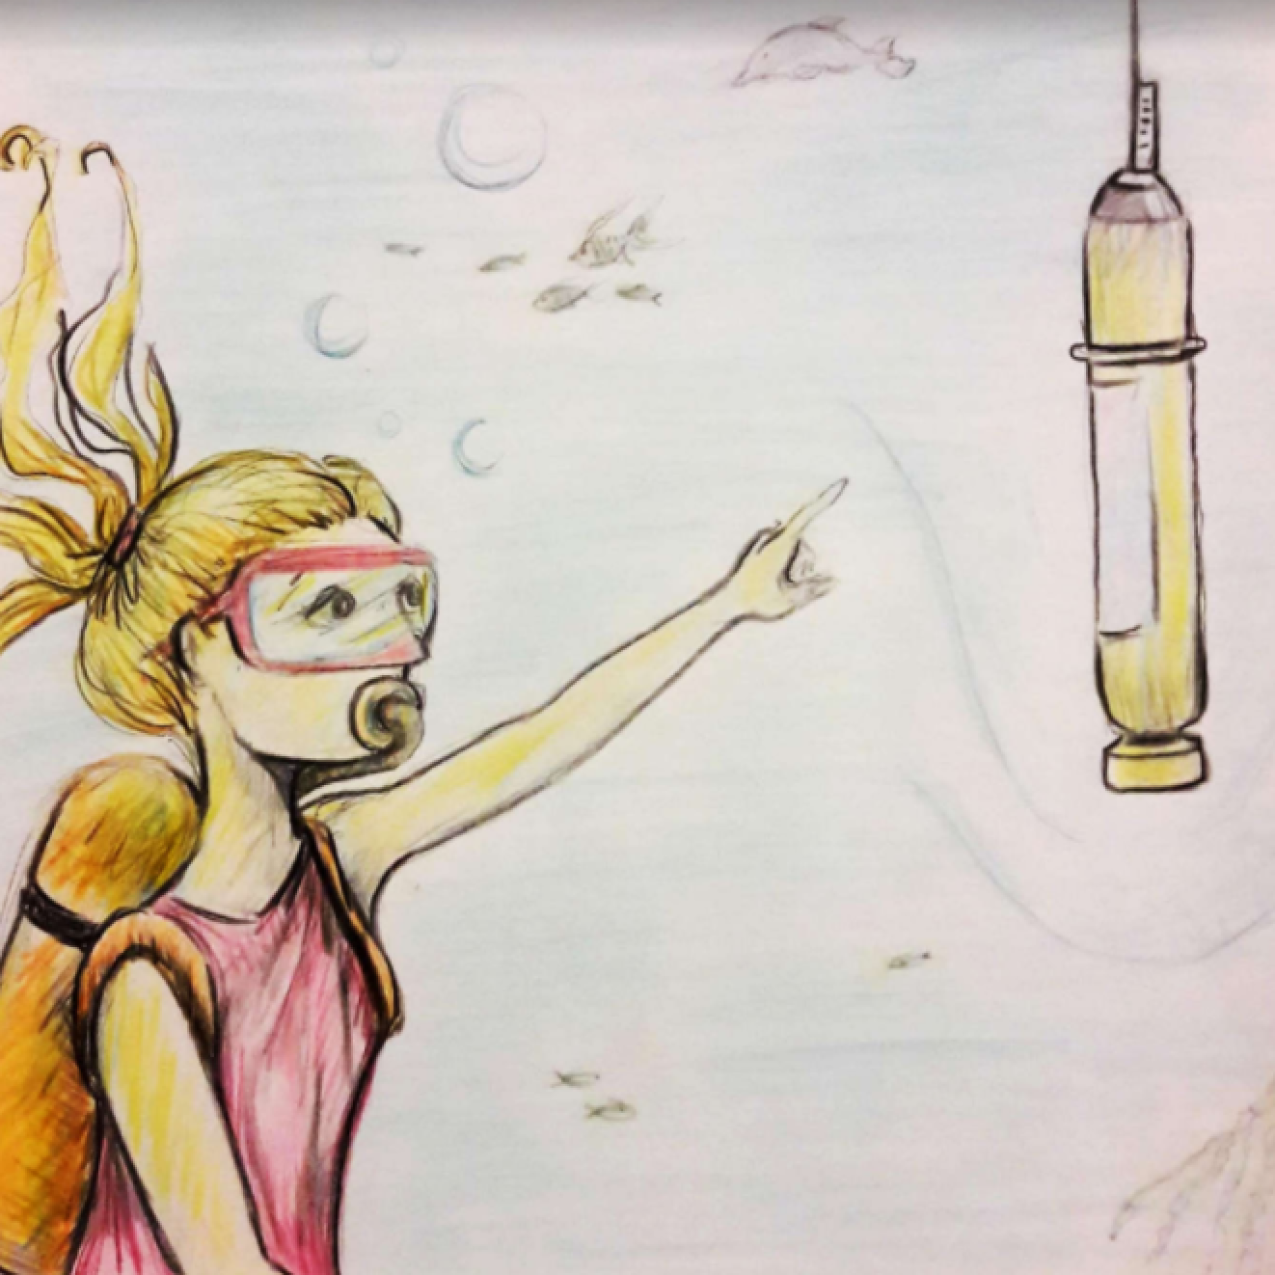 An illustration of a young girl underwater wearing a scuba mask and regulator. She points to an underwater data collection device.